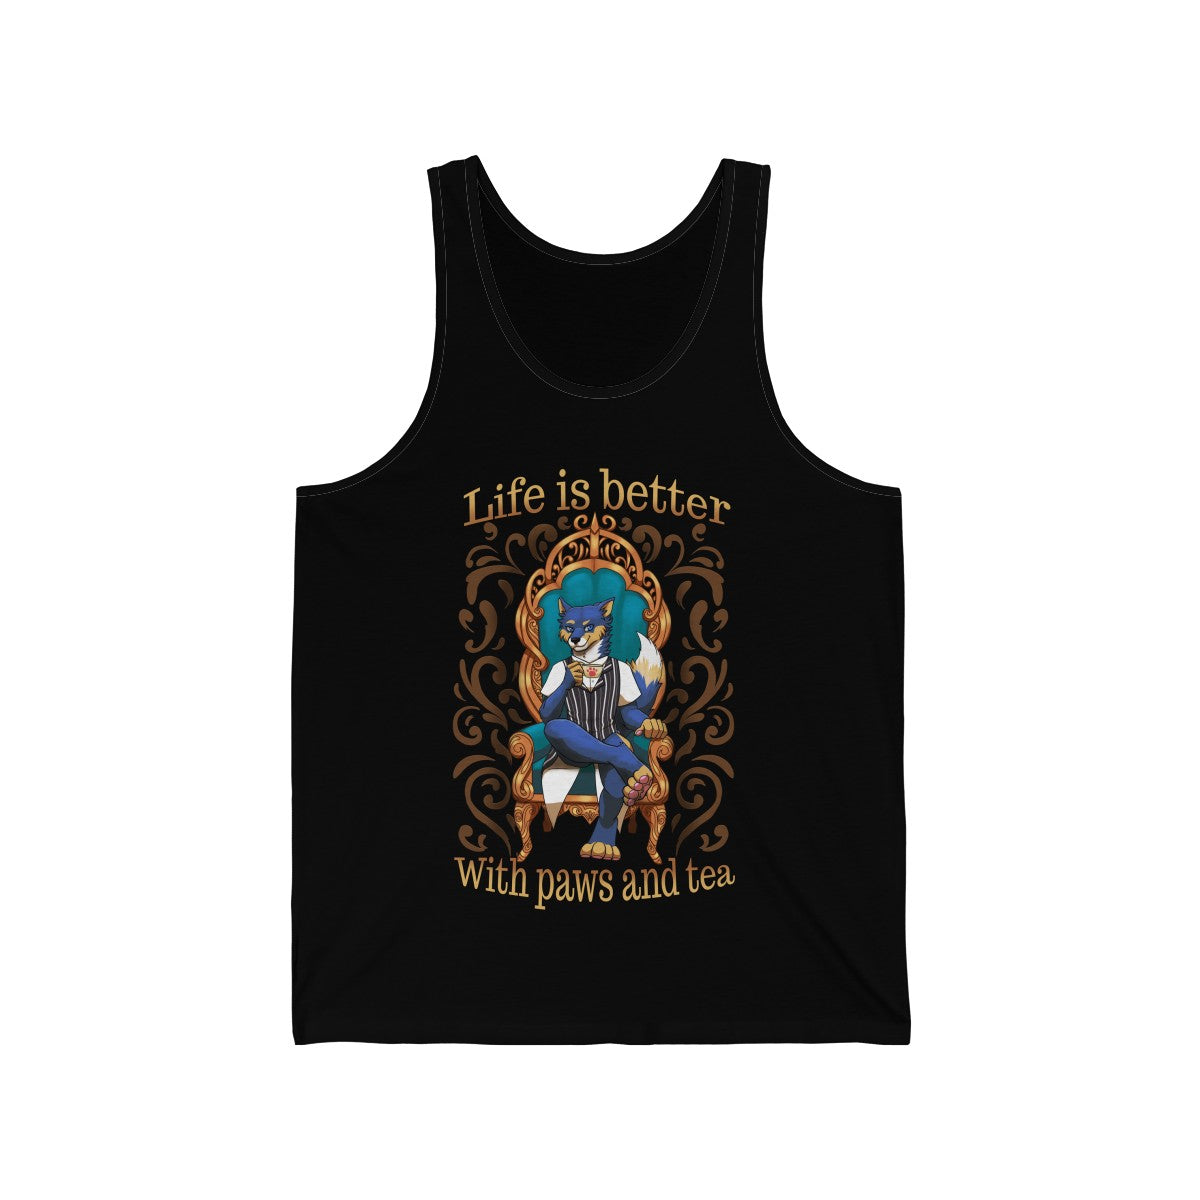 Life is better with Paws and Tea - Tank Top Tank Top Artemis Wishfoot Black XS 